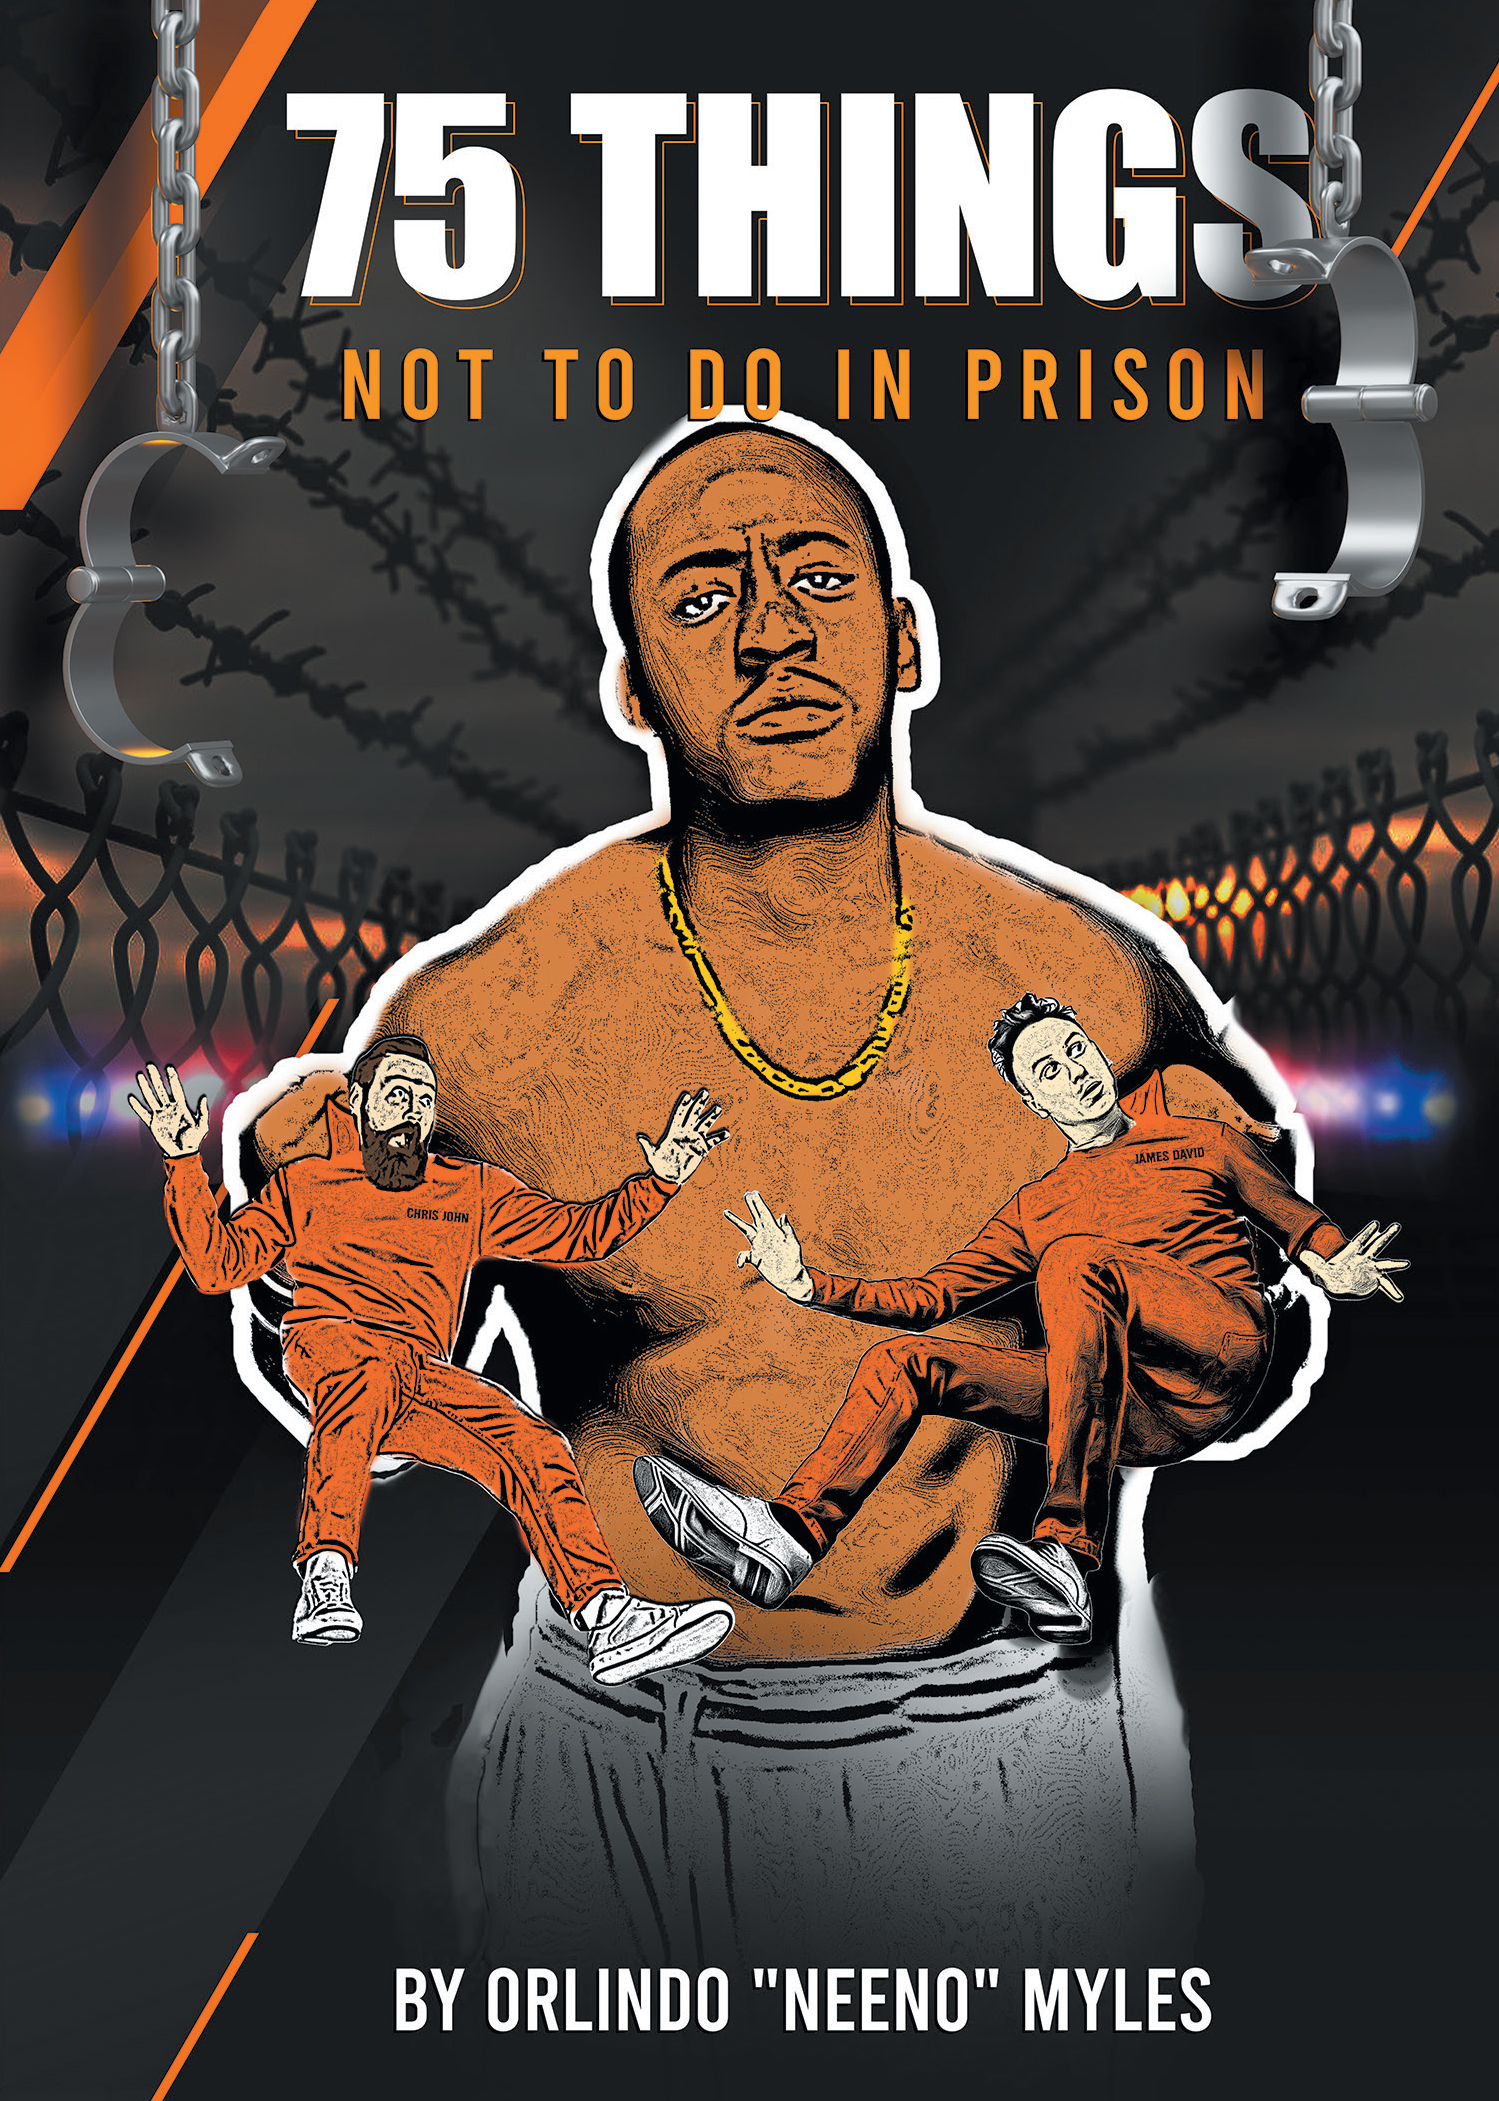 Orlindo "Neeno" Myles’s New Book, “75 Things NOT to Do in Prison,” is a Collection of Advice and Funny Stories from the Author’s Firsthand Experience